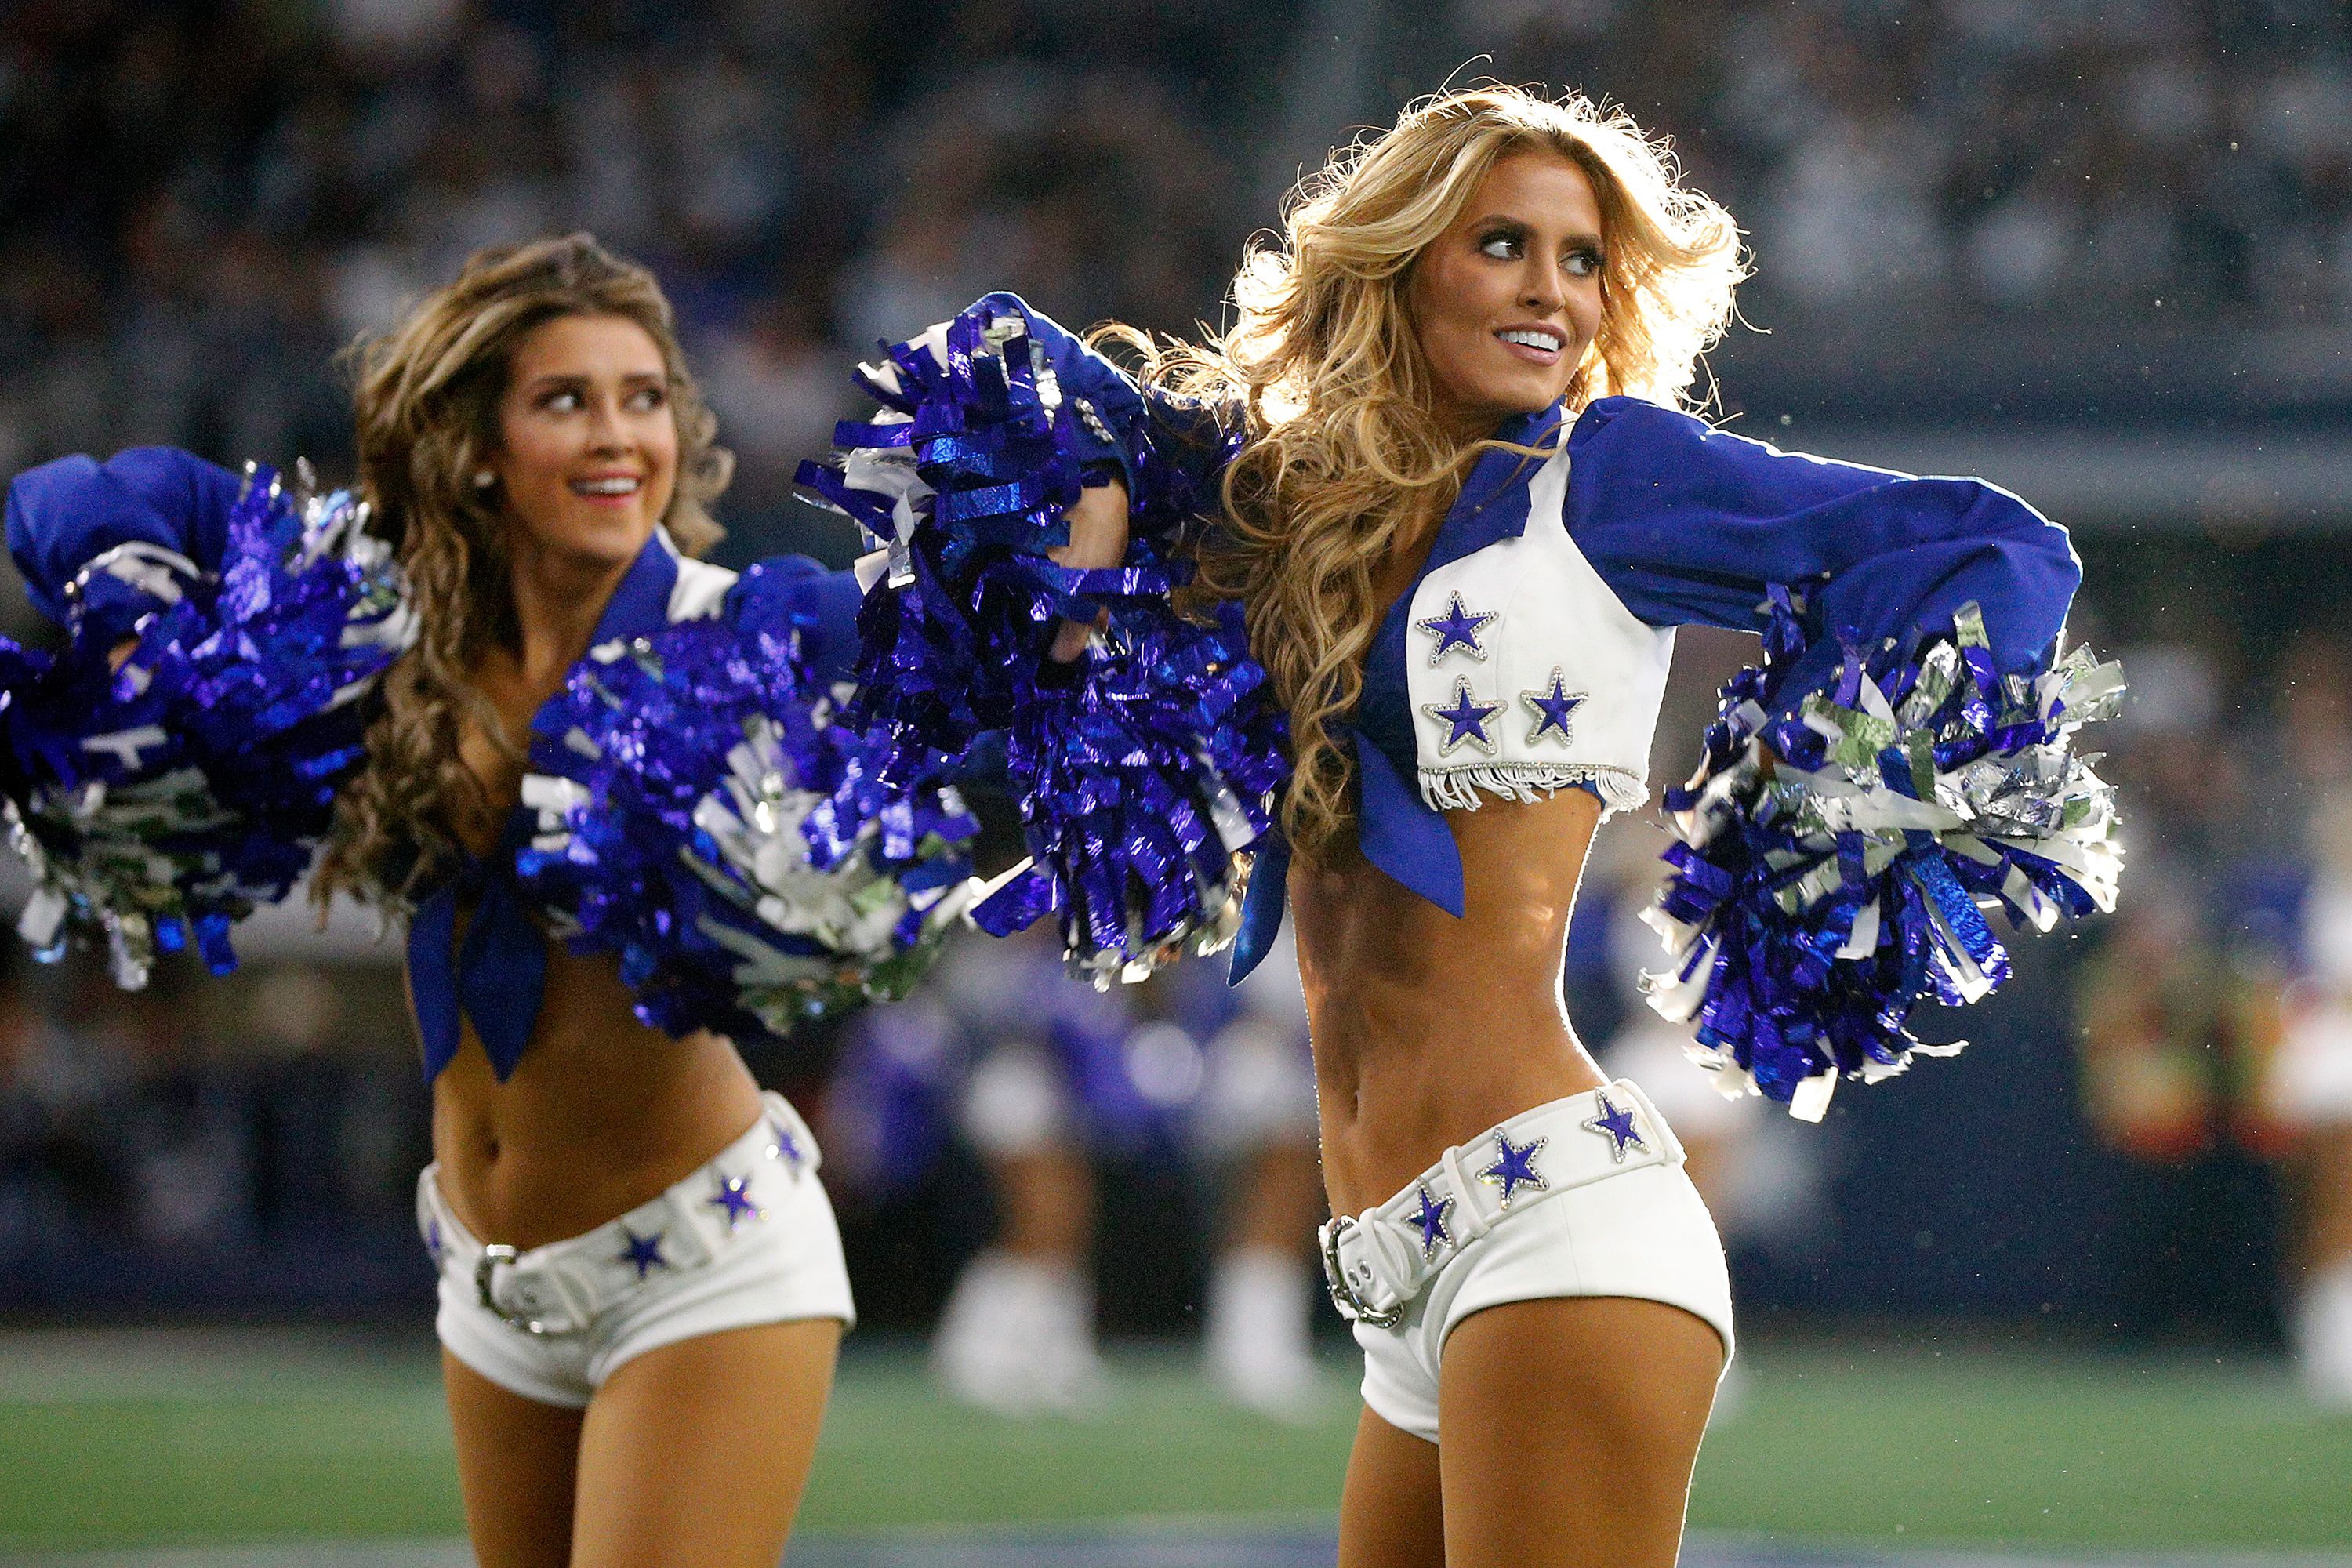 NFL cheer uniforms have been scrutinized since the 1970s, but